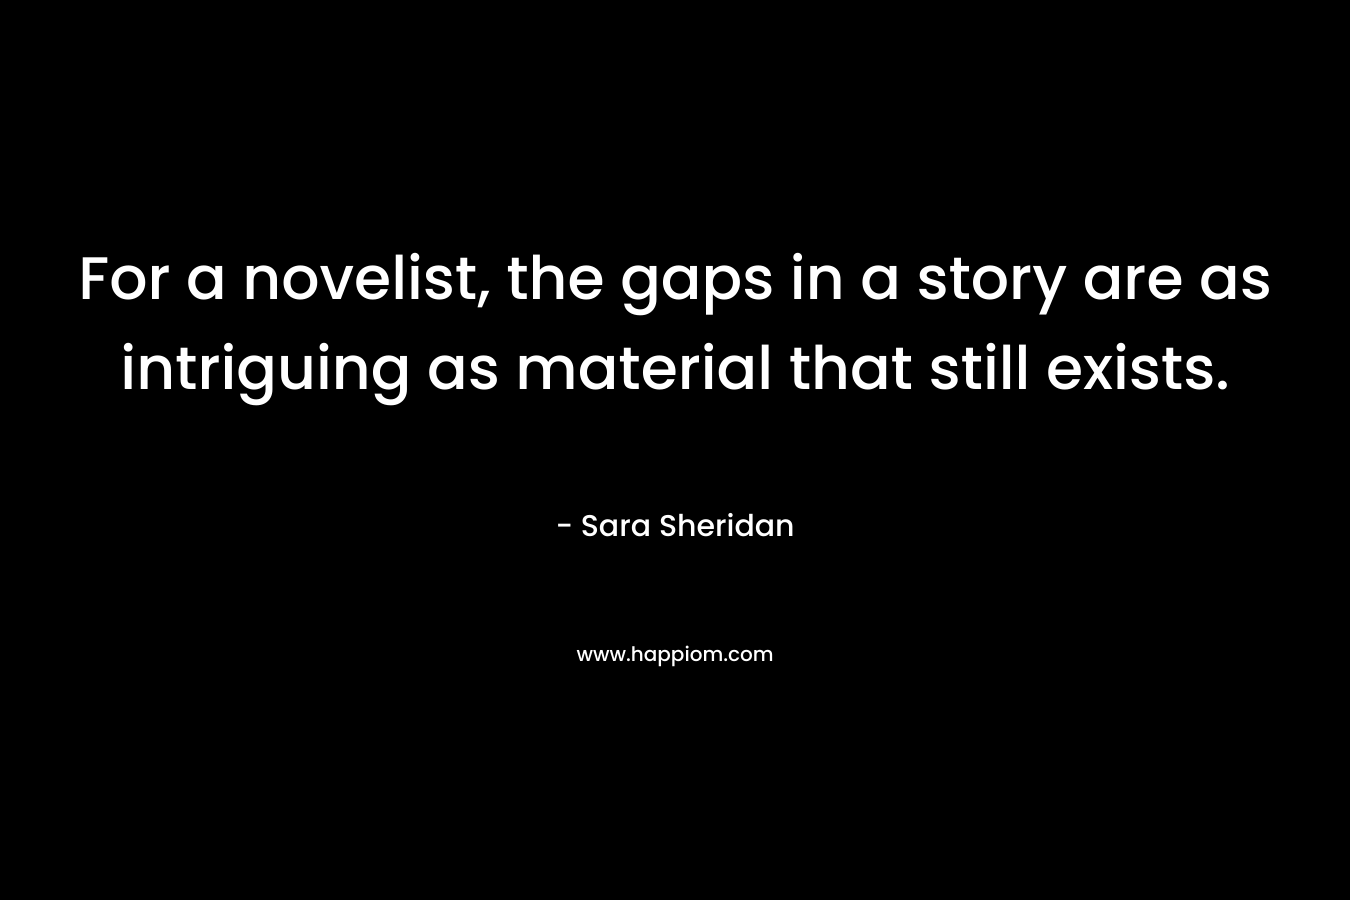 For a novelist, the gaps in a story are as intriguing as material that still exists.